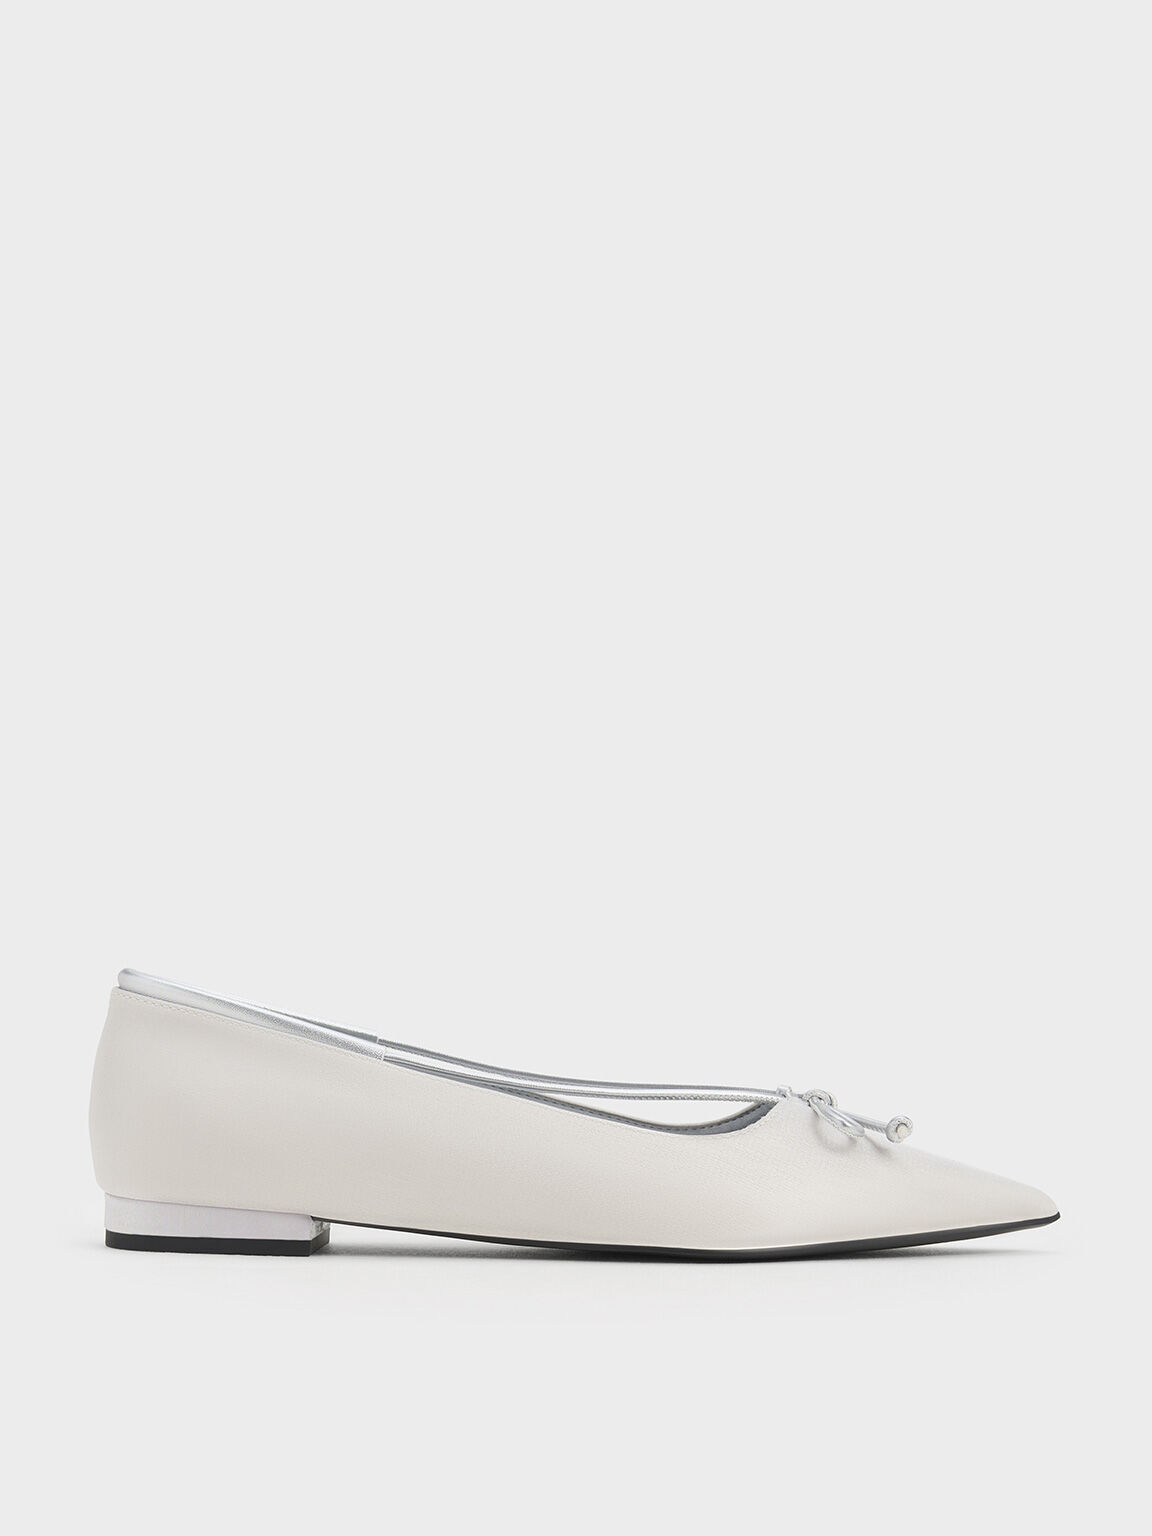 Metallic Bow Pointed-Toe Ballet Flats, Silver, hi-res